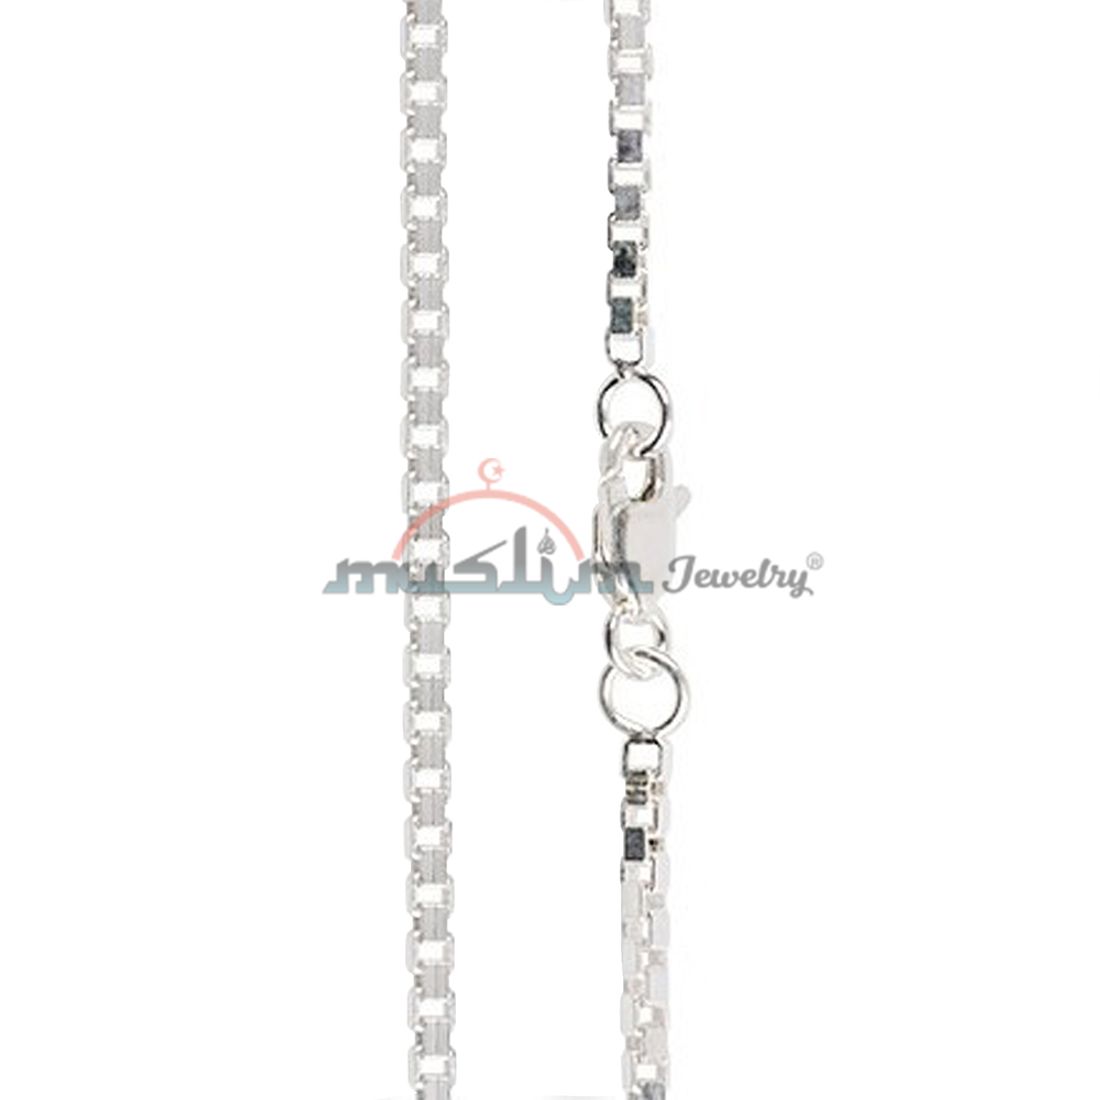 High Quality Sterling Silver Sturdy 35 gauge Square Box Chain 2x2mm Jewelry Necklace